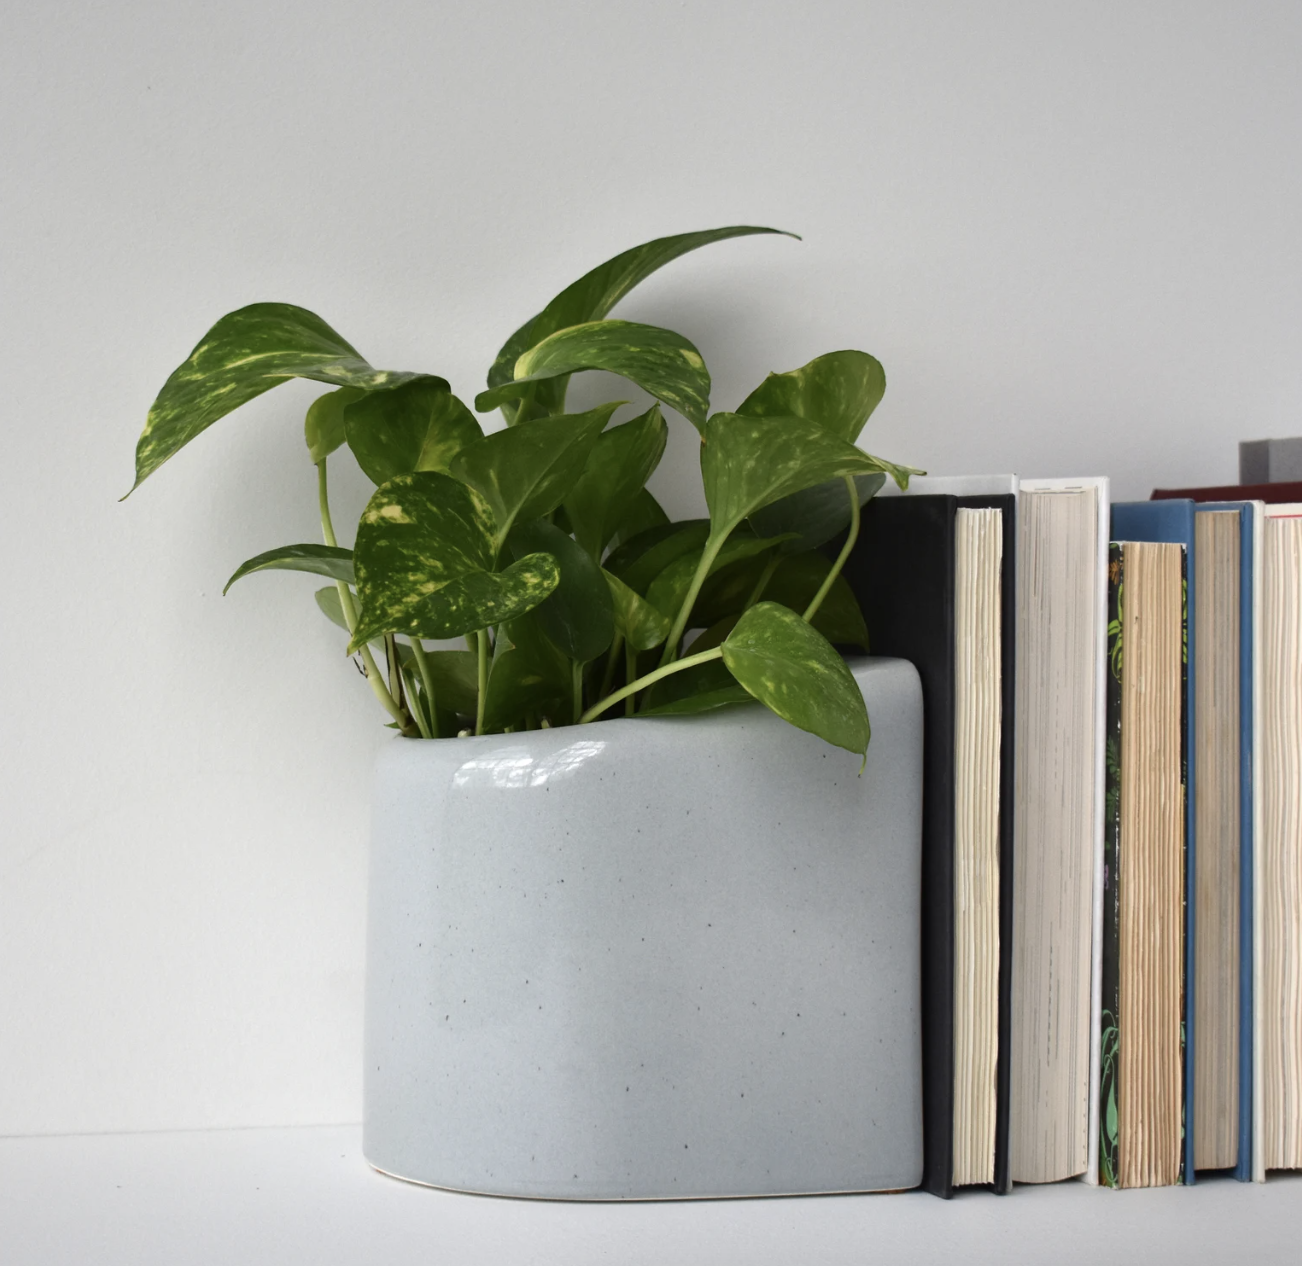 A curved grey ceramic planter is also a bookend